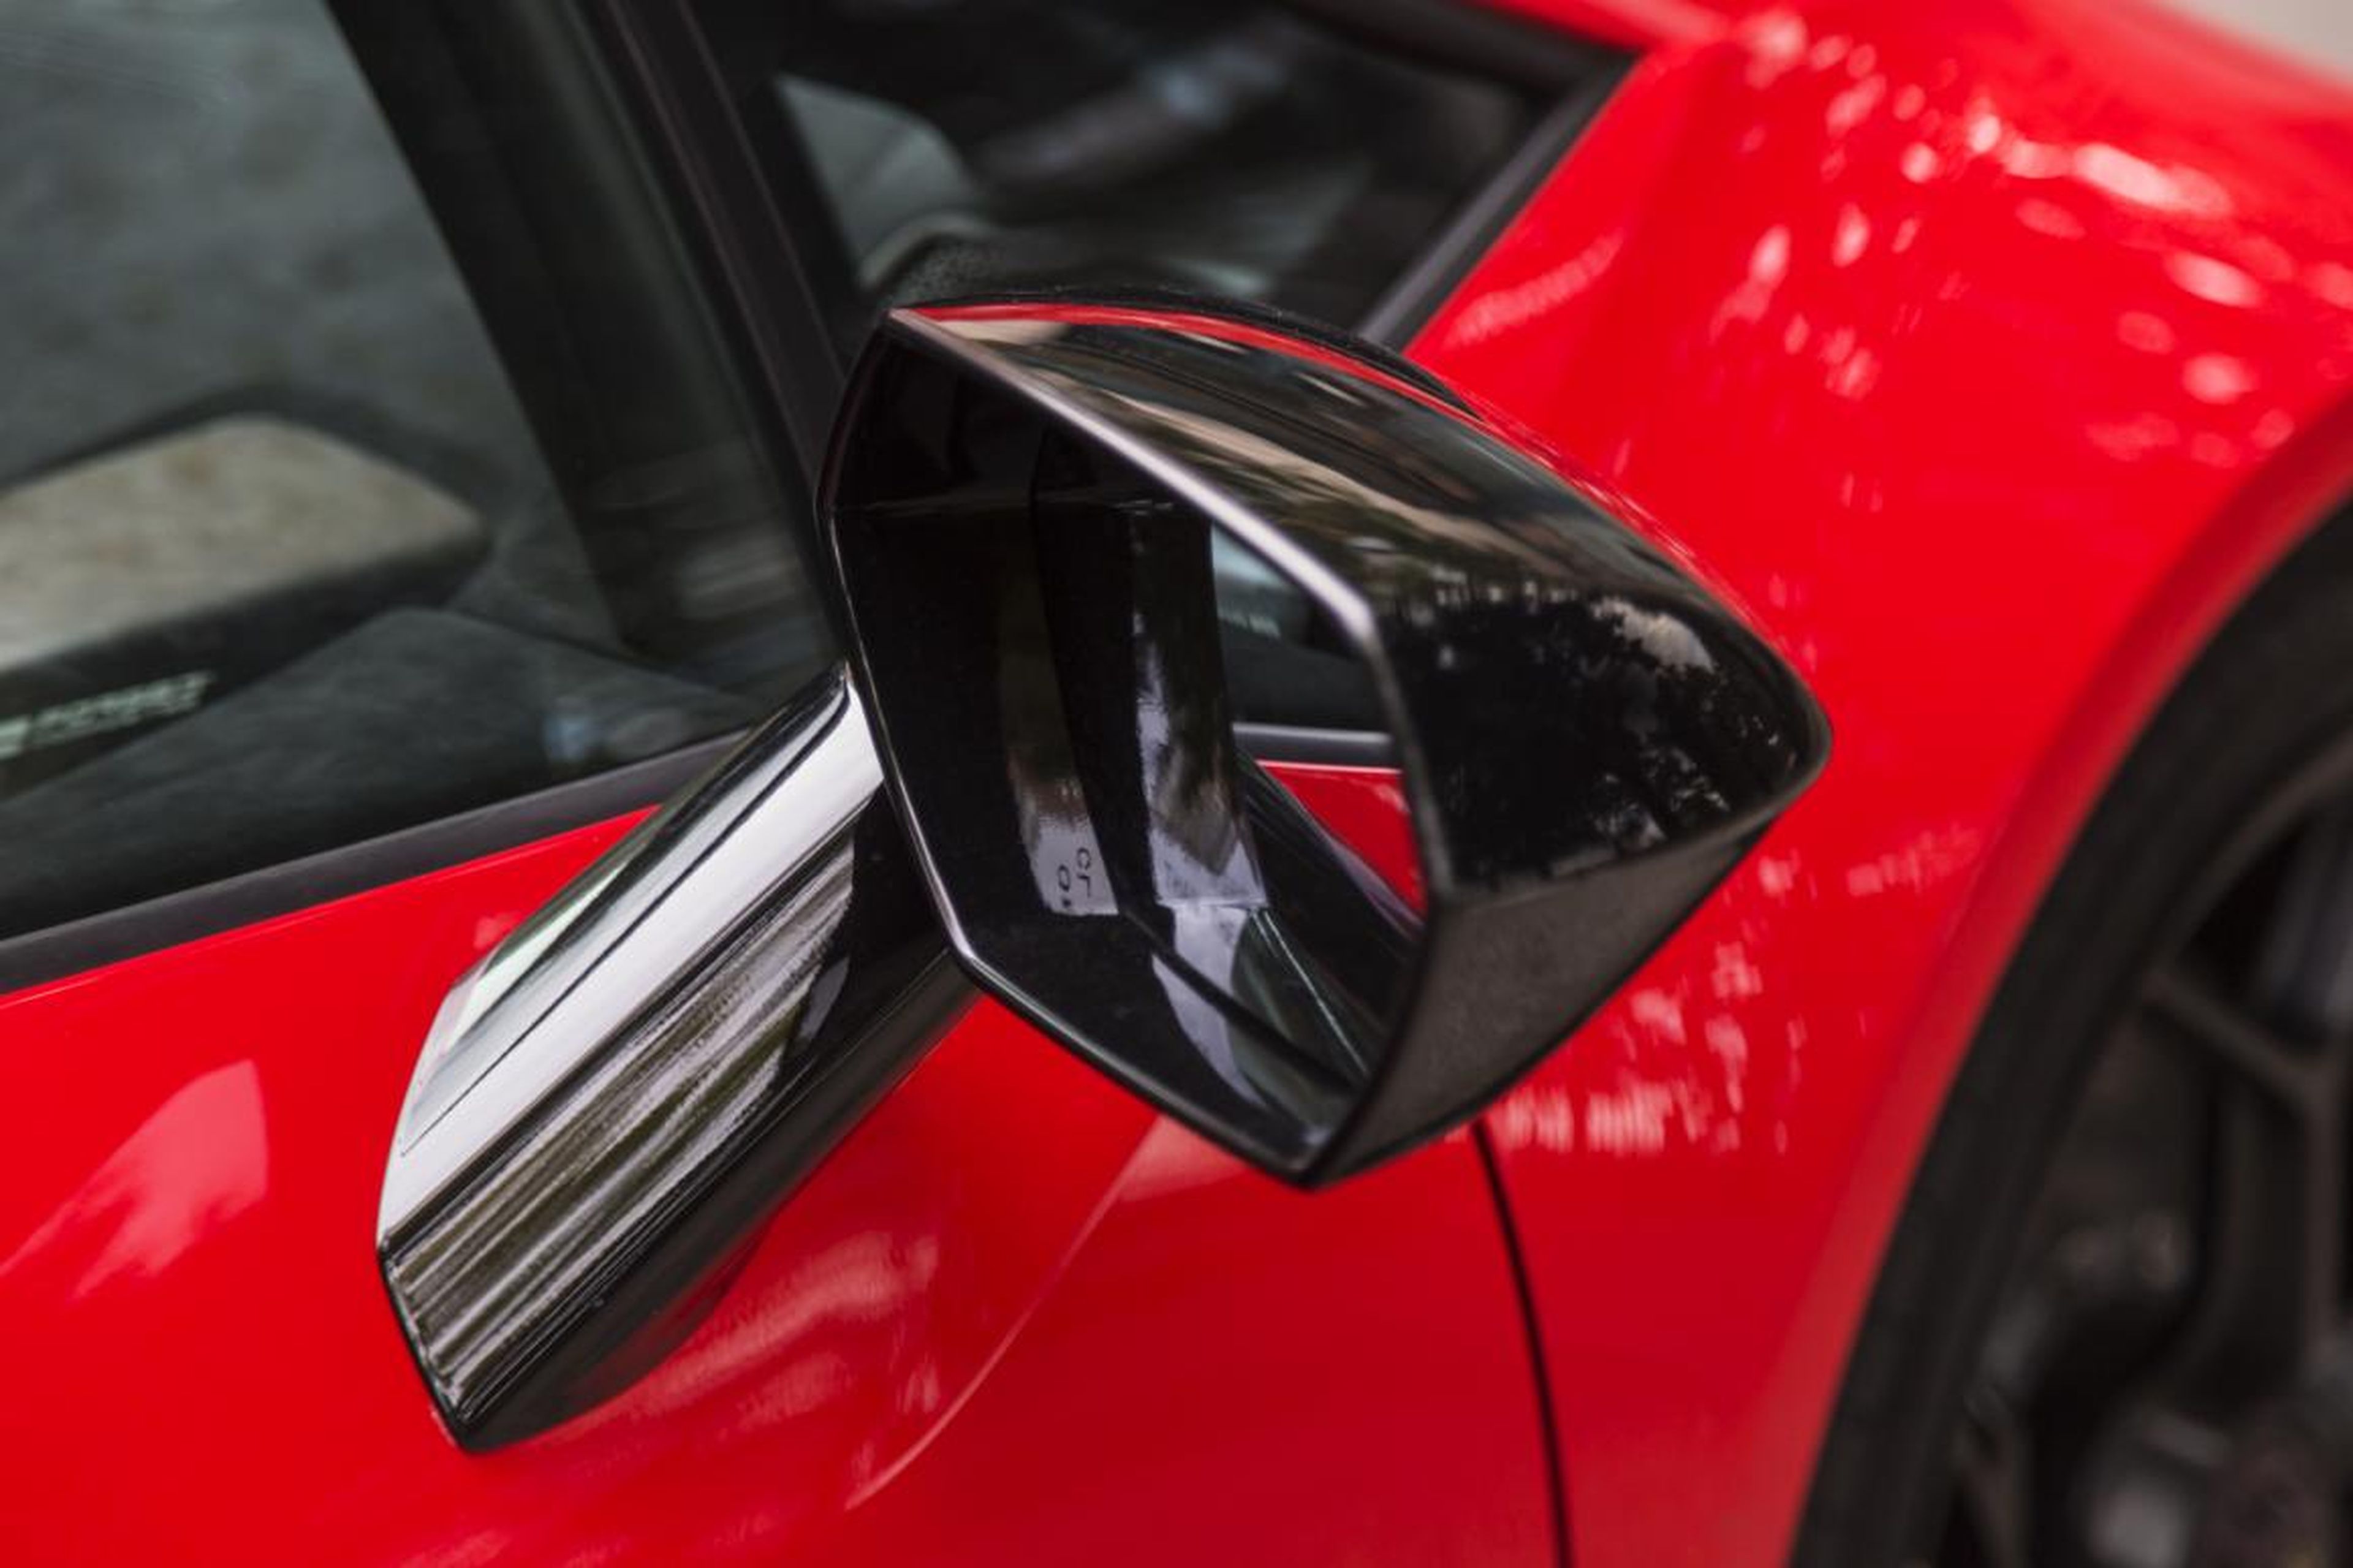 A theme throughout the Huracán is hexagons. Here's one: it's the side-view mirror.